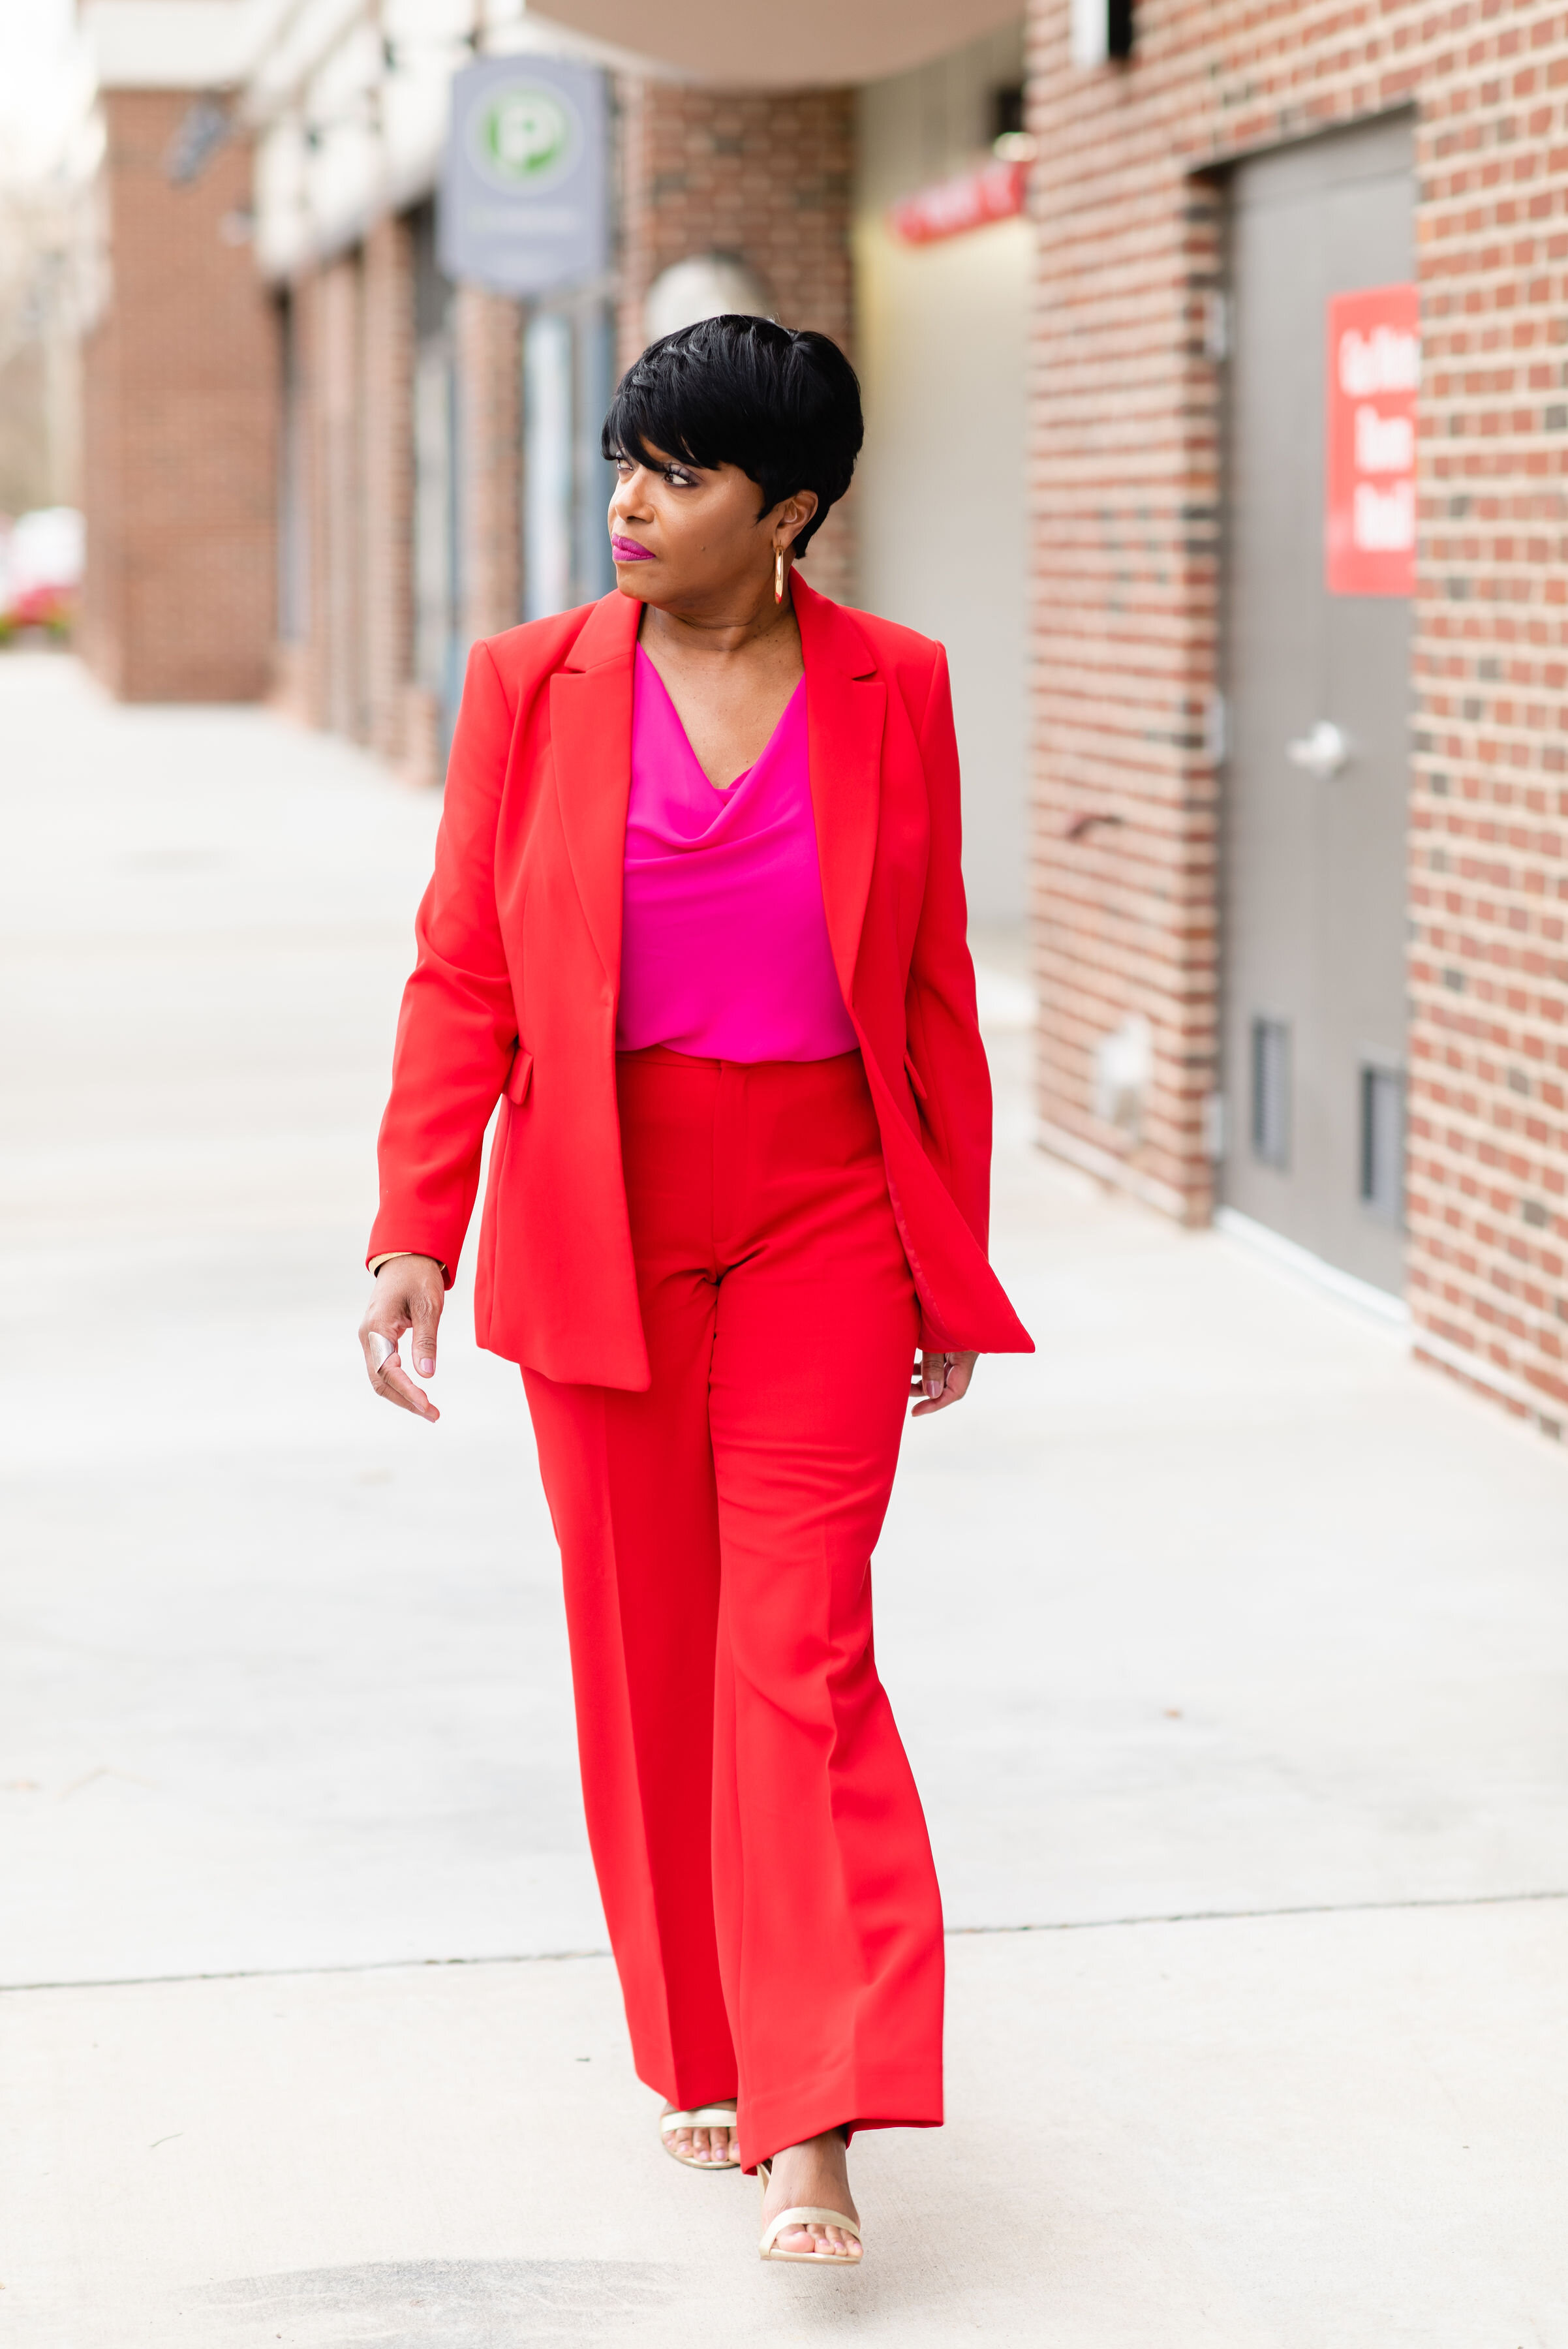 HOW TO WEAR PINK AND RED! — Medley Style